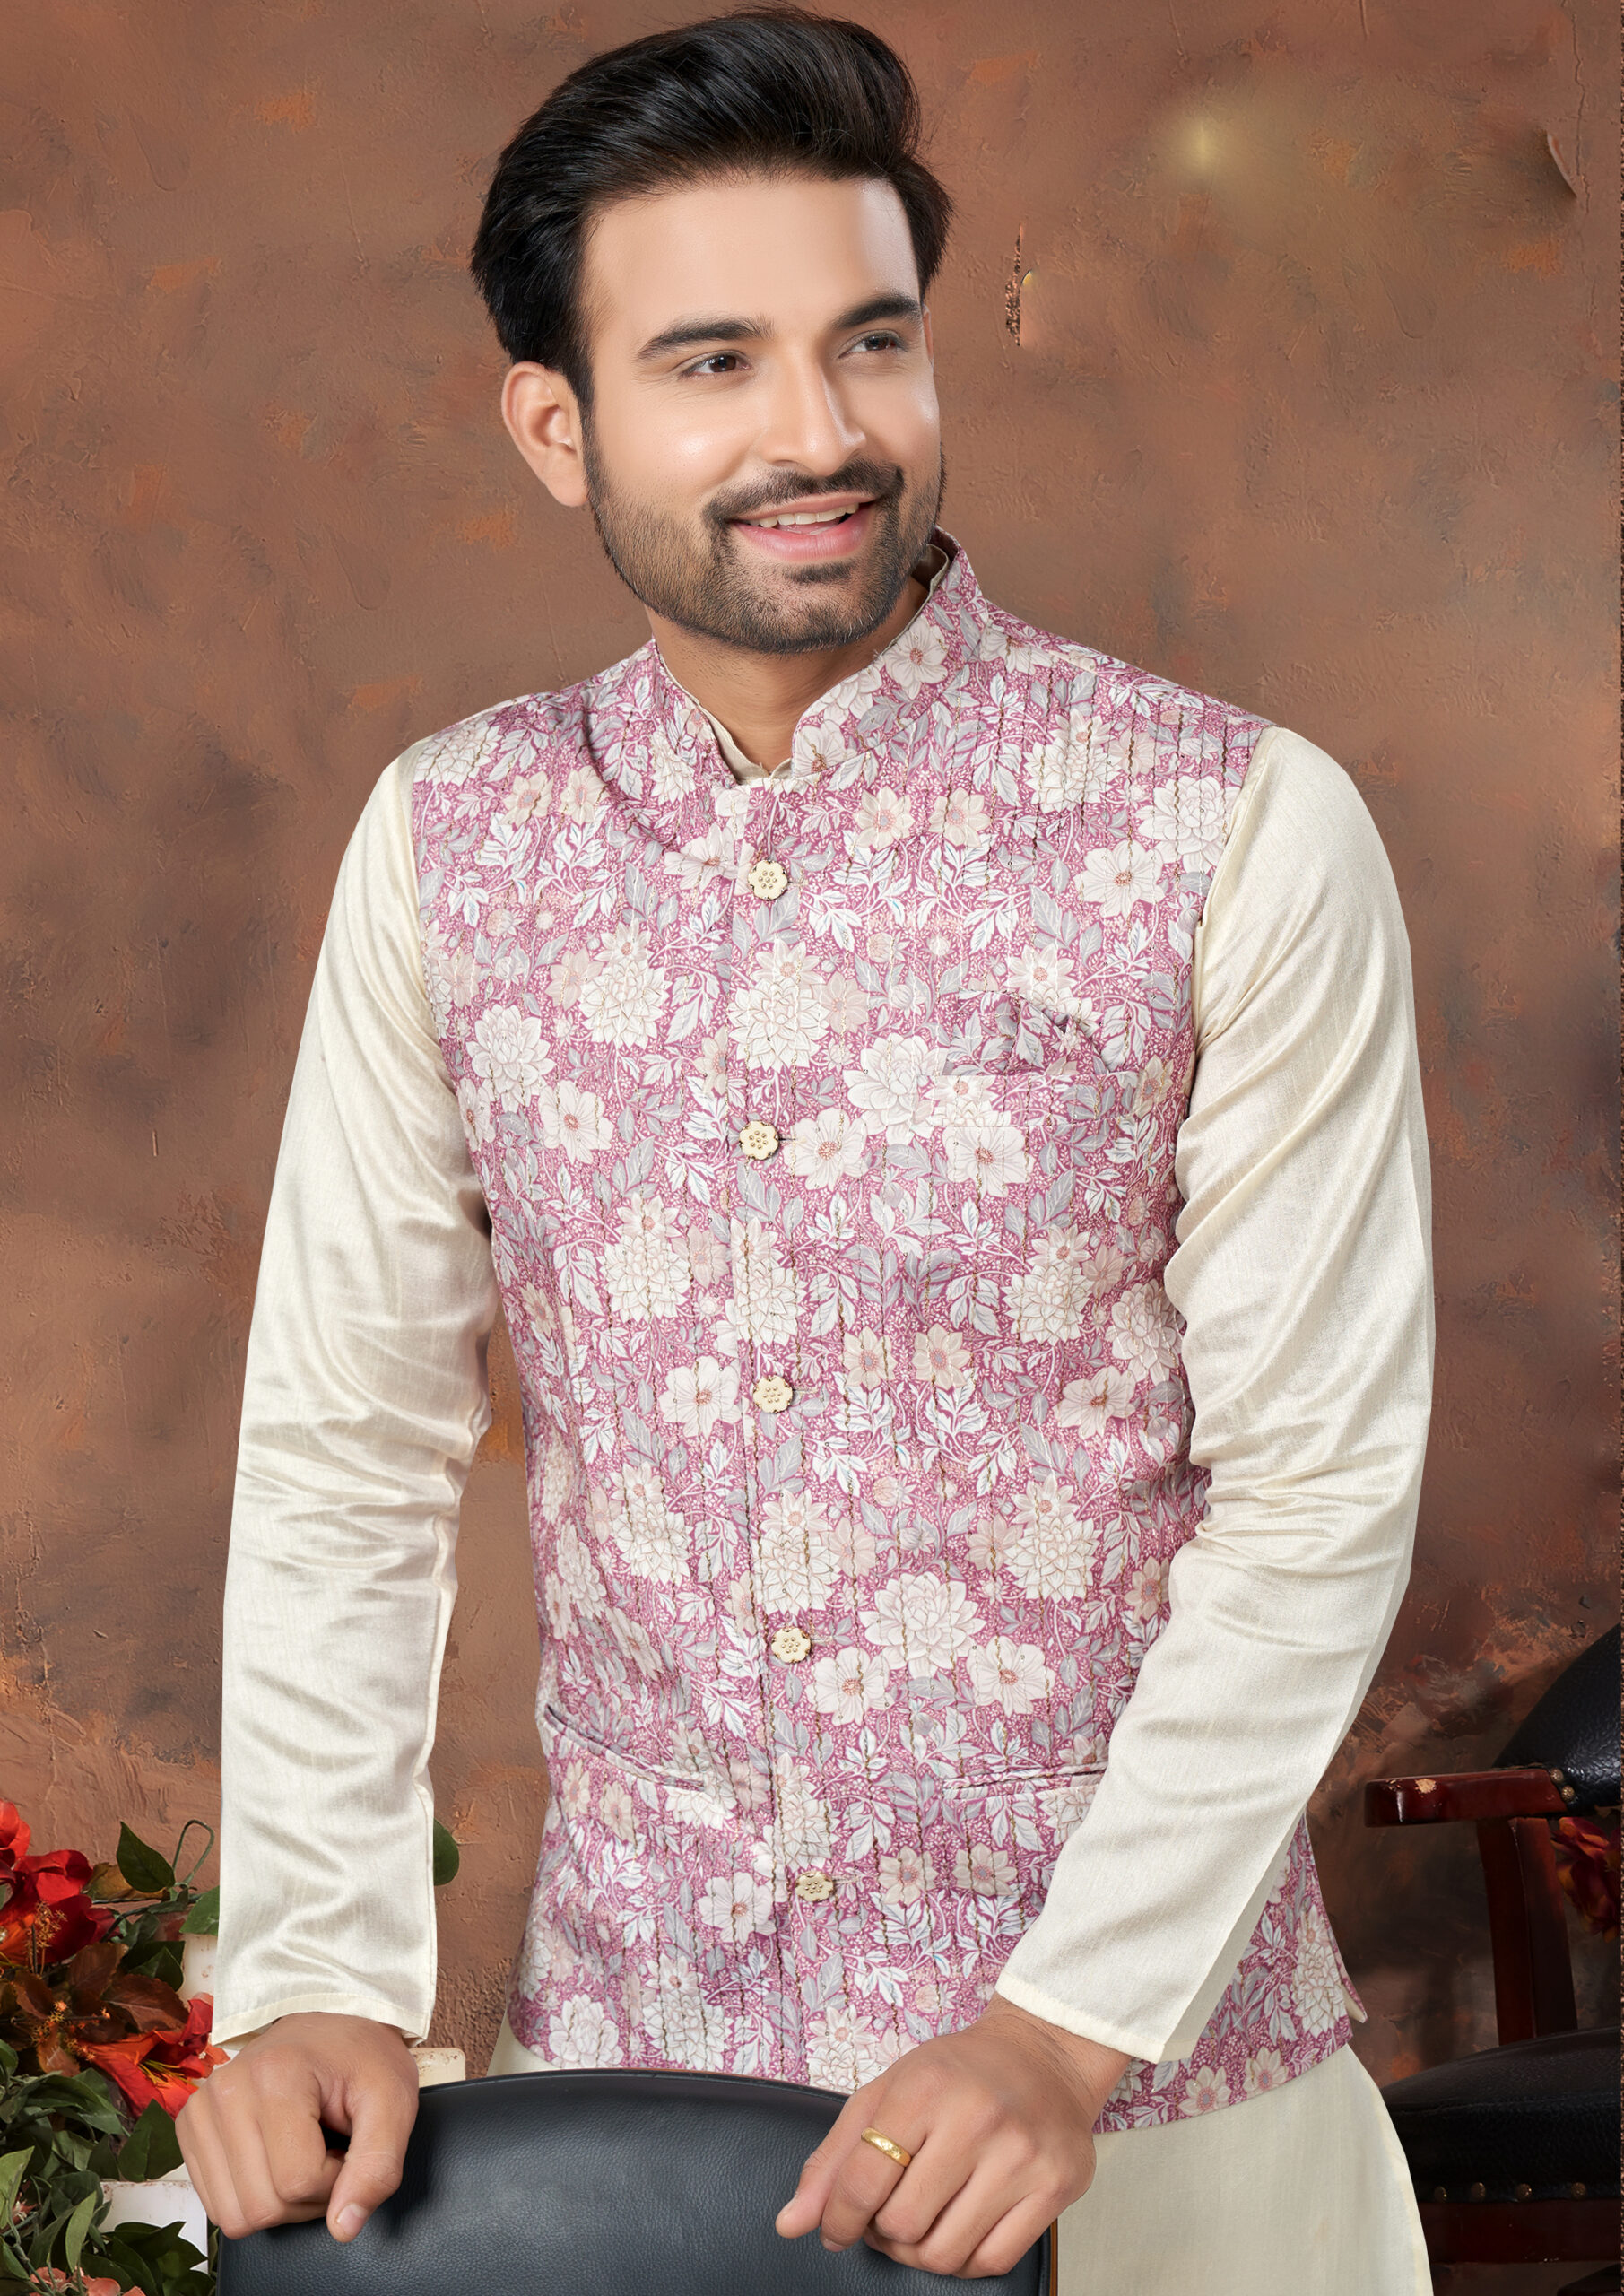 Nehru Jacket Combination for Wedding : Style Guide for Men